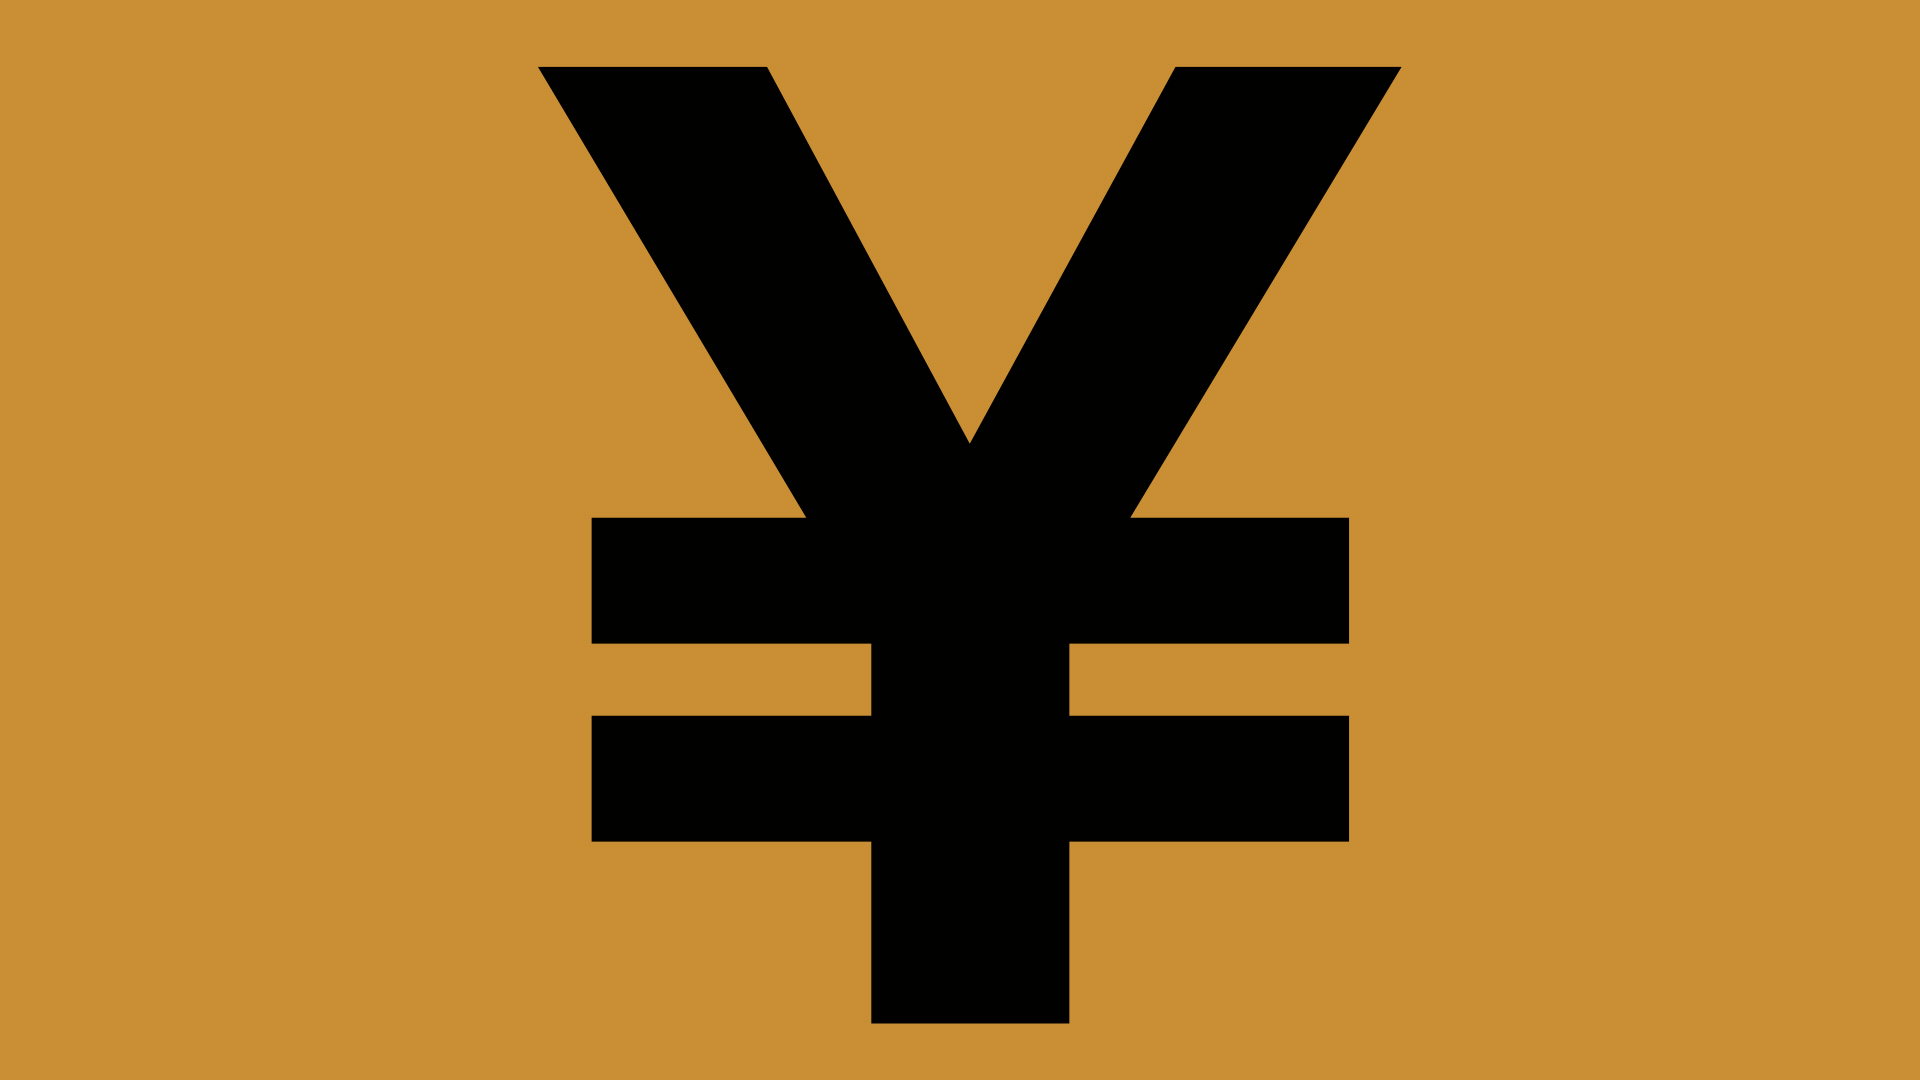 Animated illustration of the yuan symbol slowly melting and distorting.